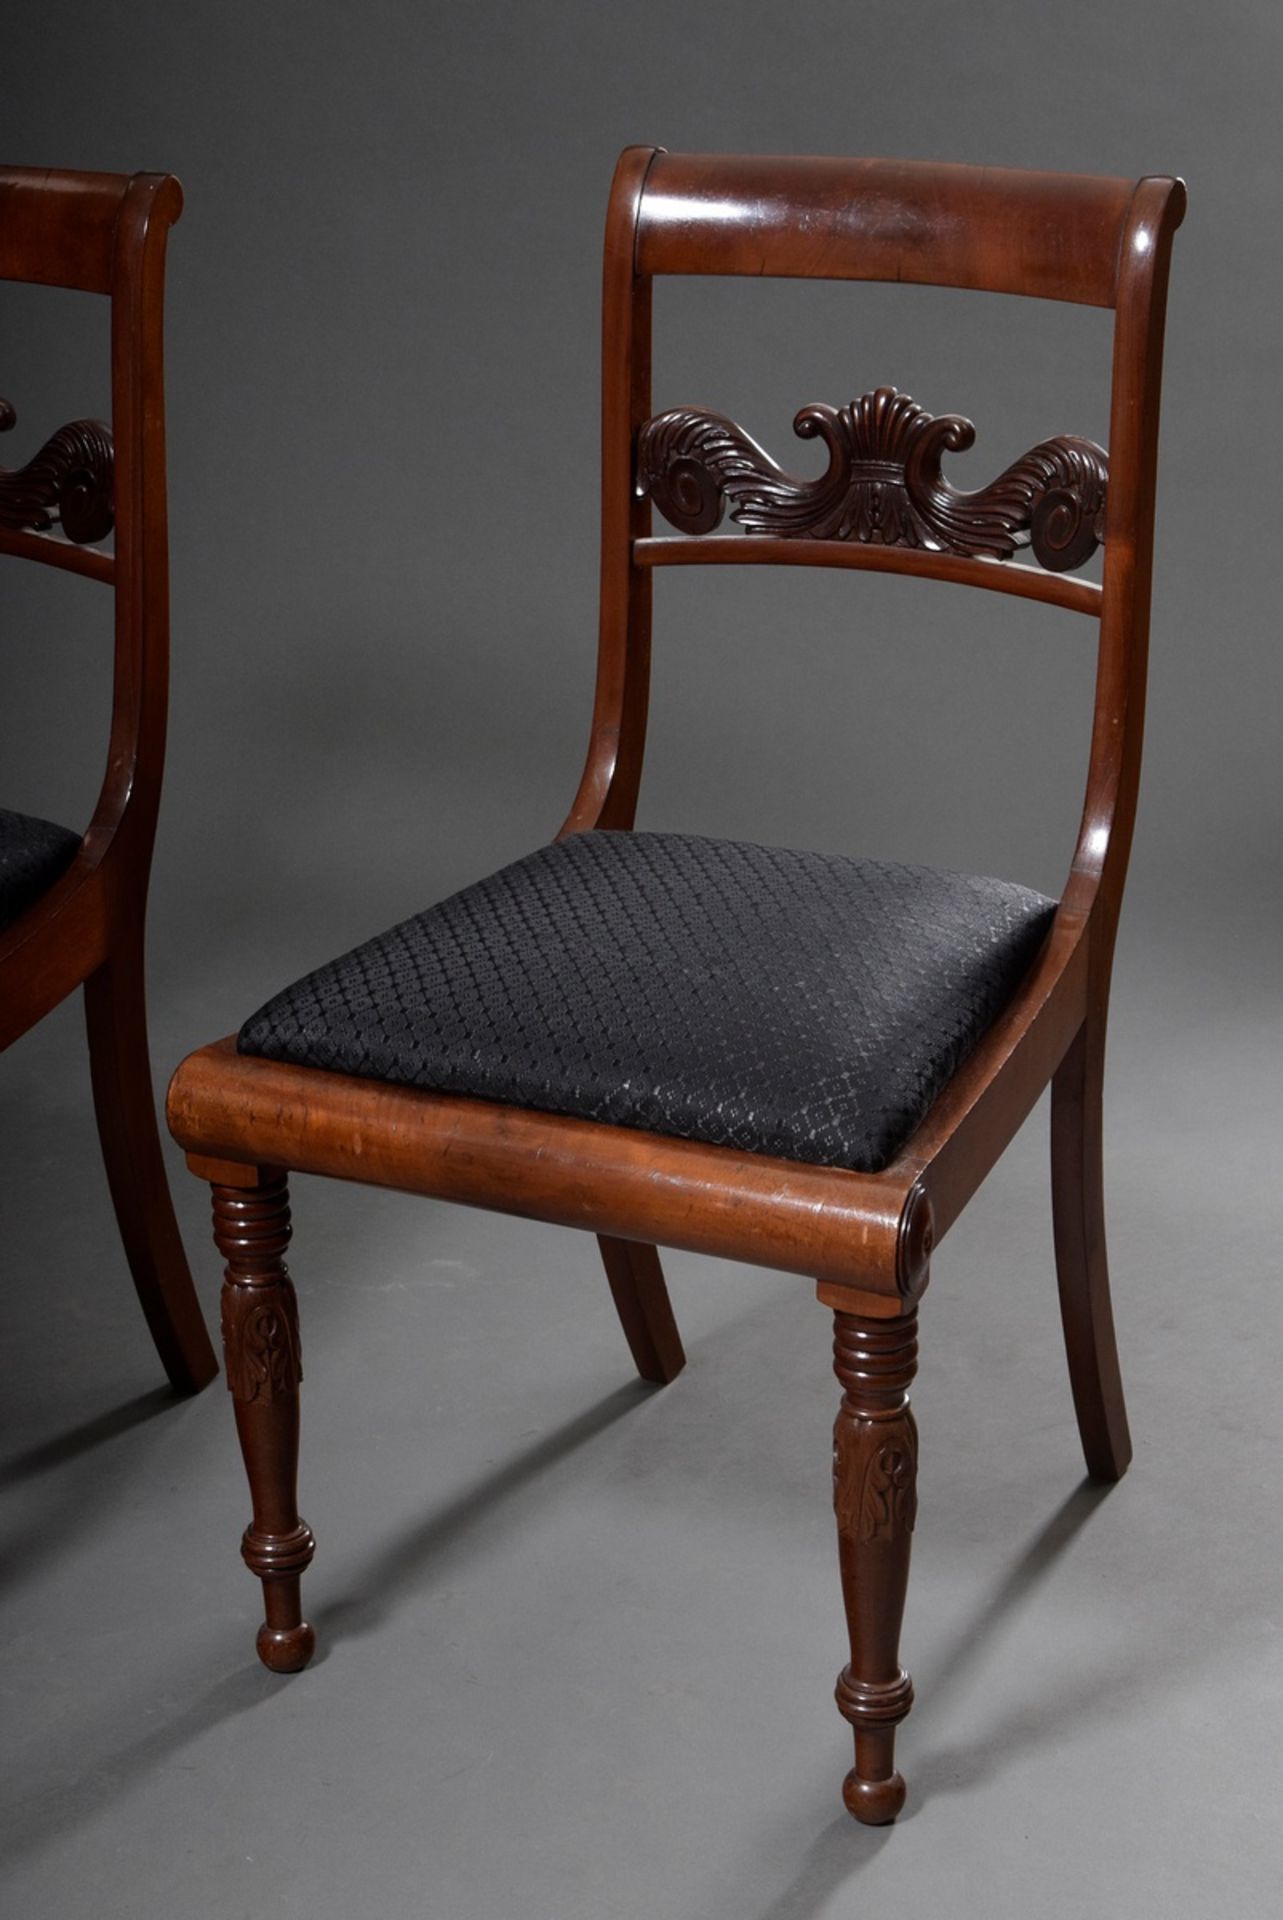 Pair of Biedermeier chairs with floral carved back board, turned legs and horsehair upholstery, mah - Image 3 of 6